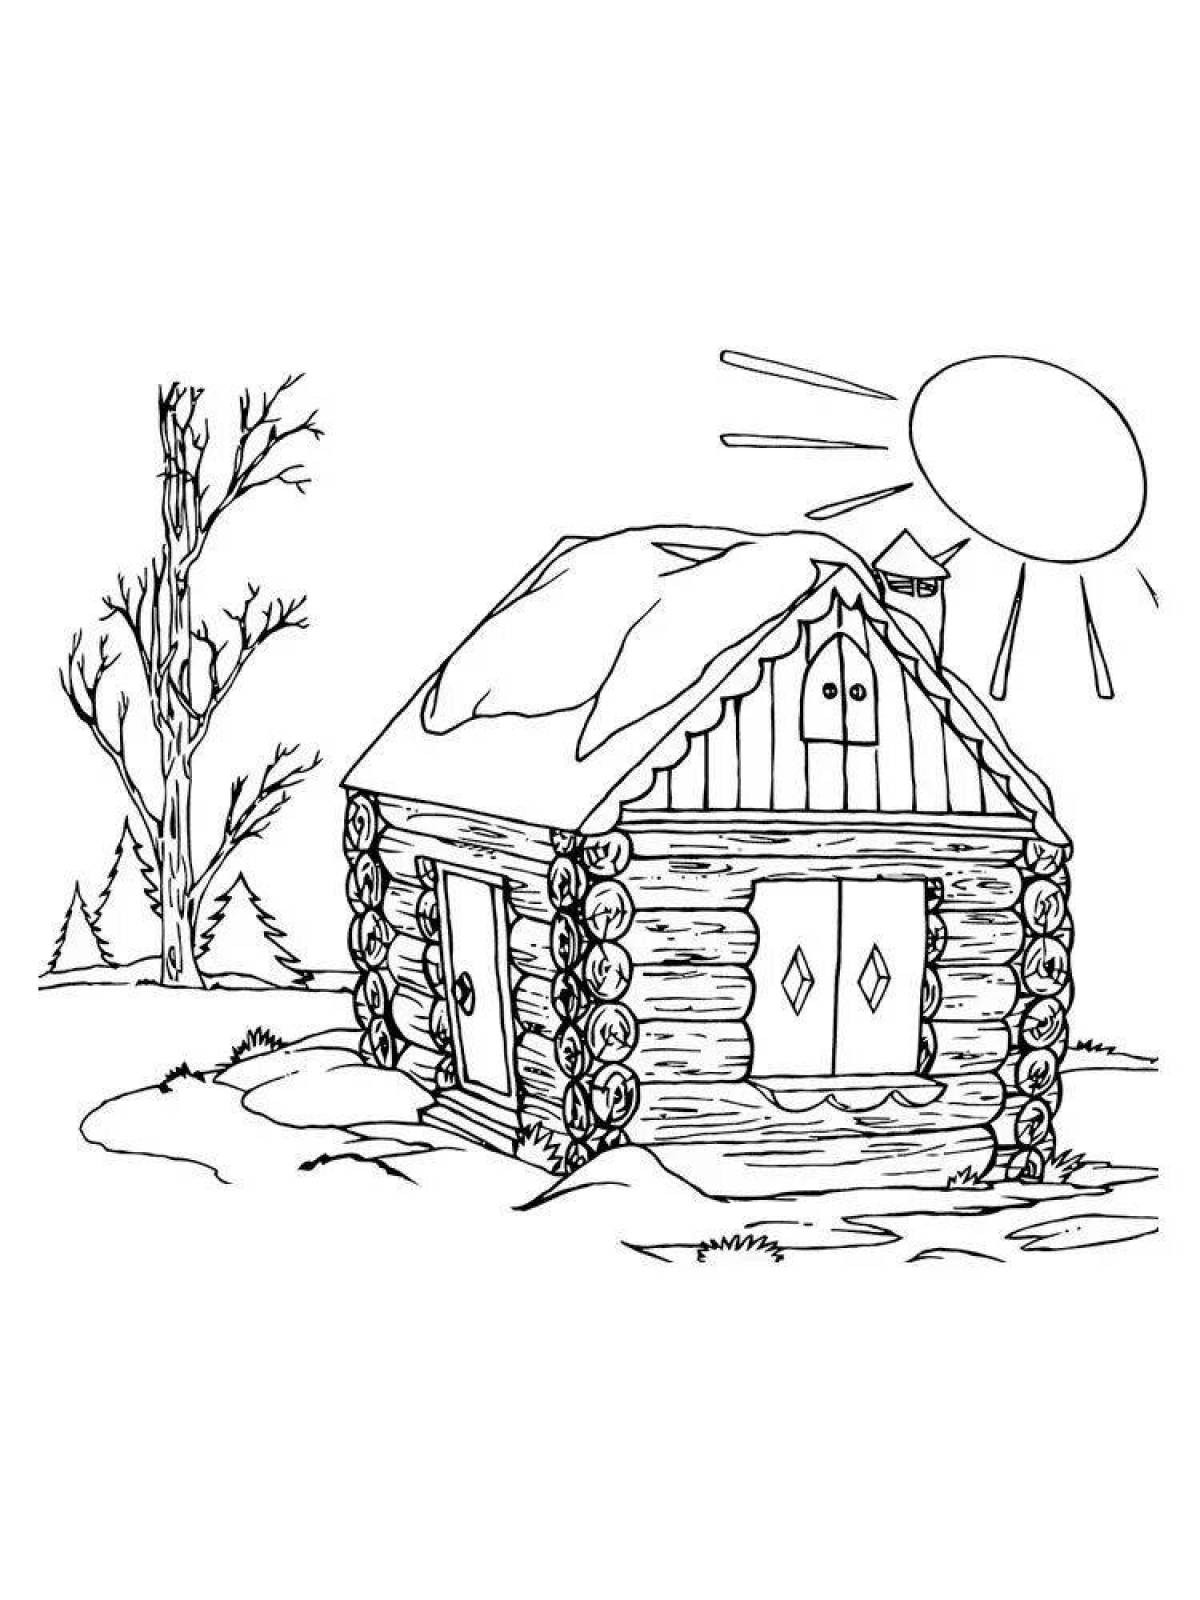 Adorable Russian hut coloring book for kids